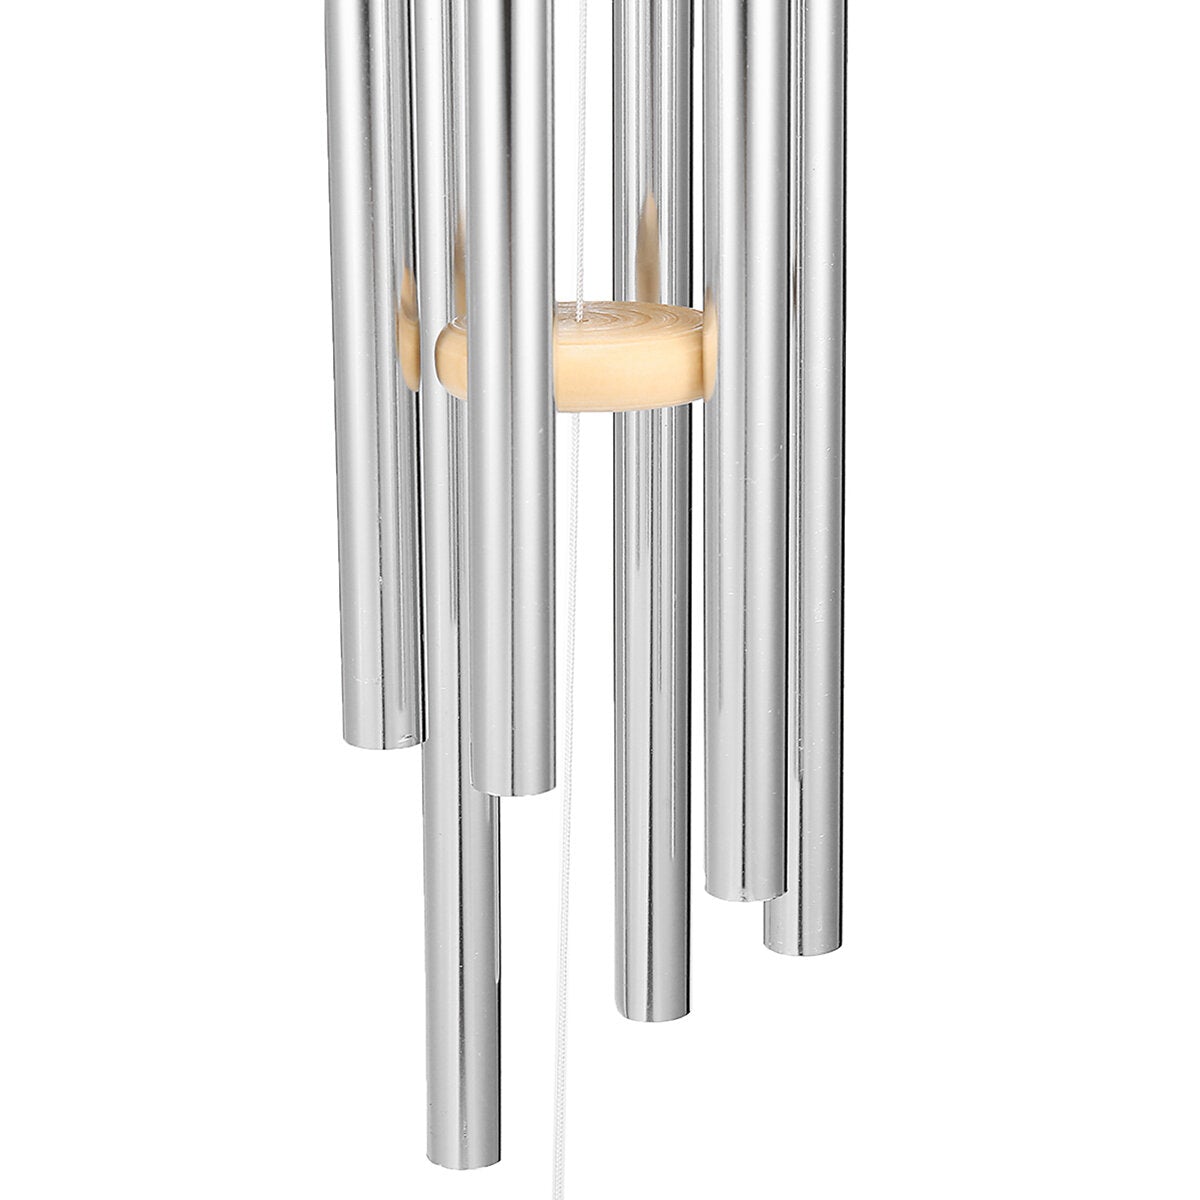 Wind Chimes Outdoor, with 6 Aluminum Tubes Wooden Bell Memorial Chimes, Best Gift Decor for Garden Patio Outdoor